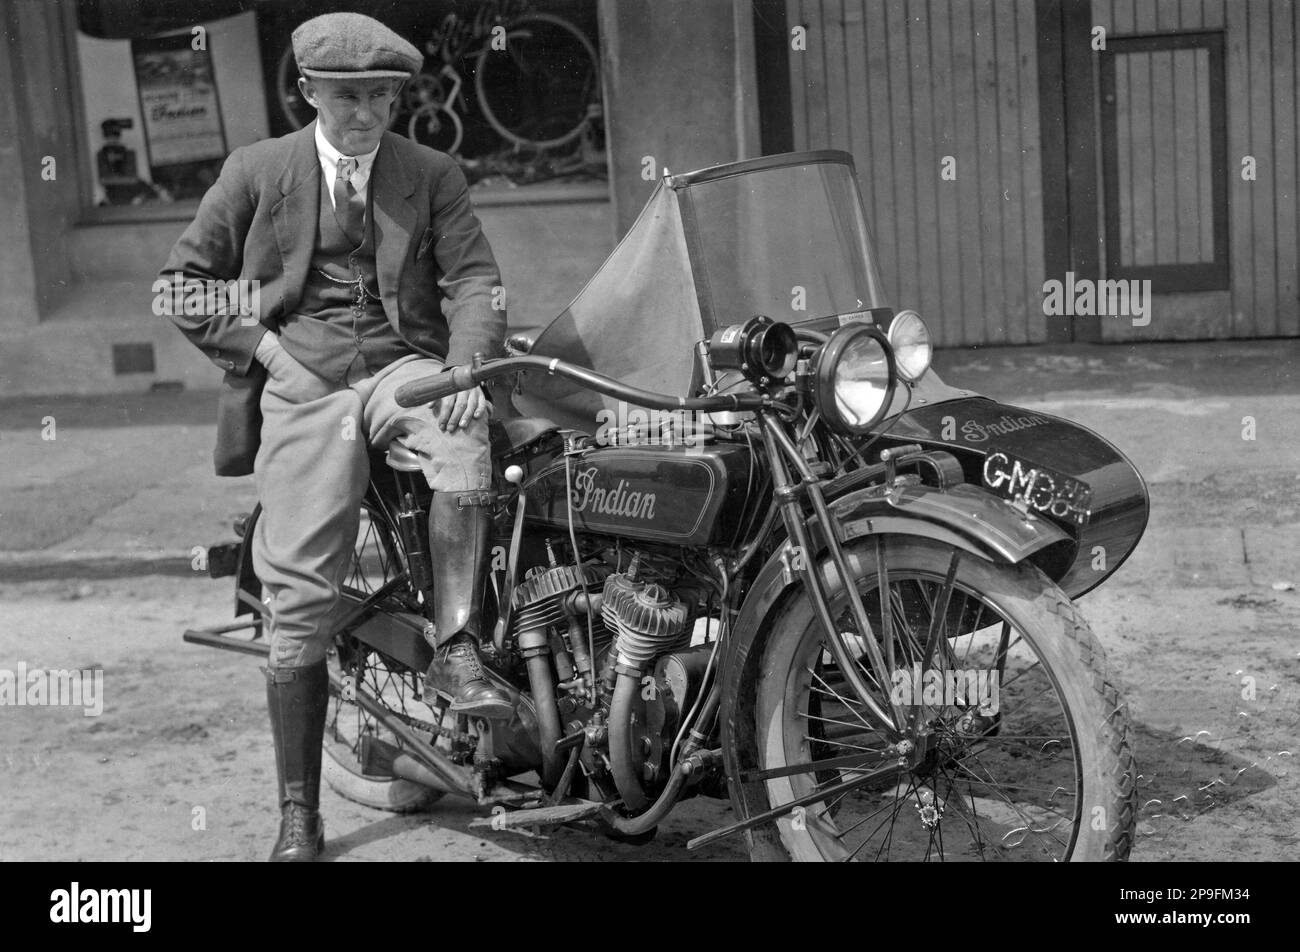 Man with Indian motorcycle and sidecar, Westland, New Zealand; early 1900s Stock Photo